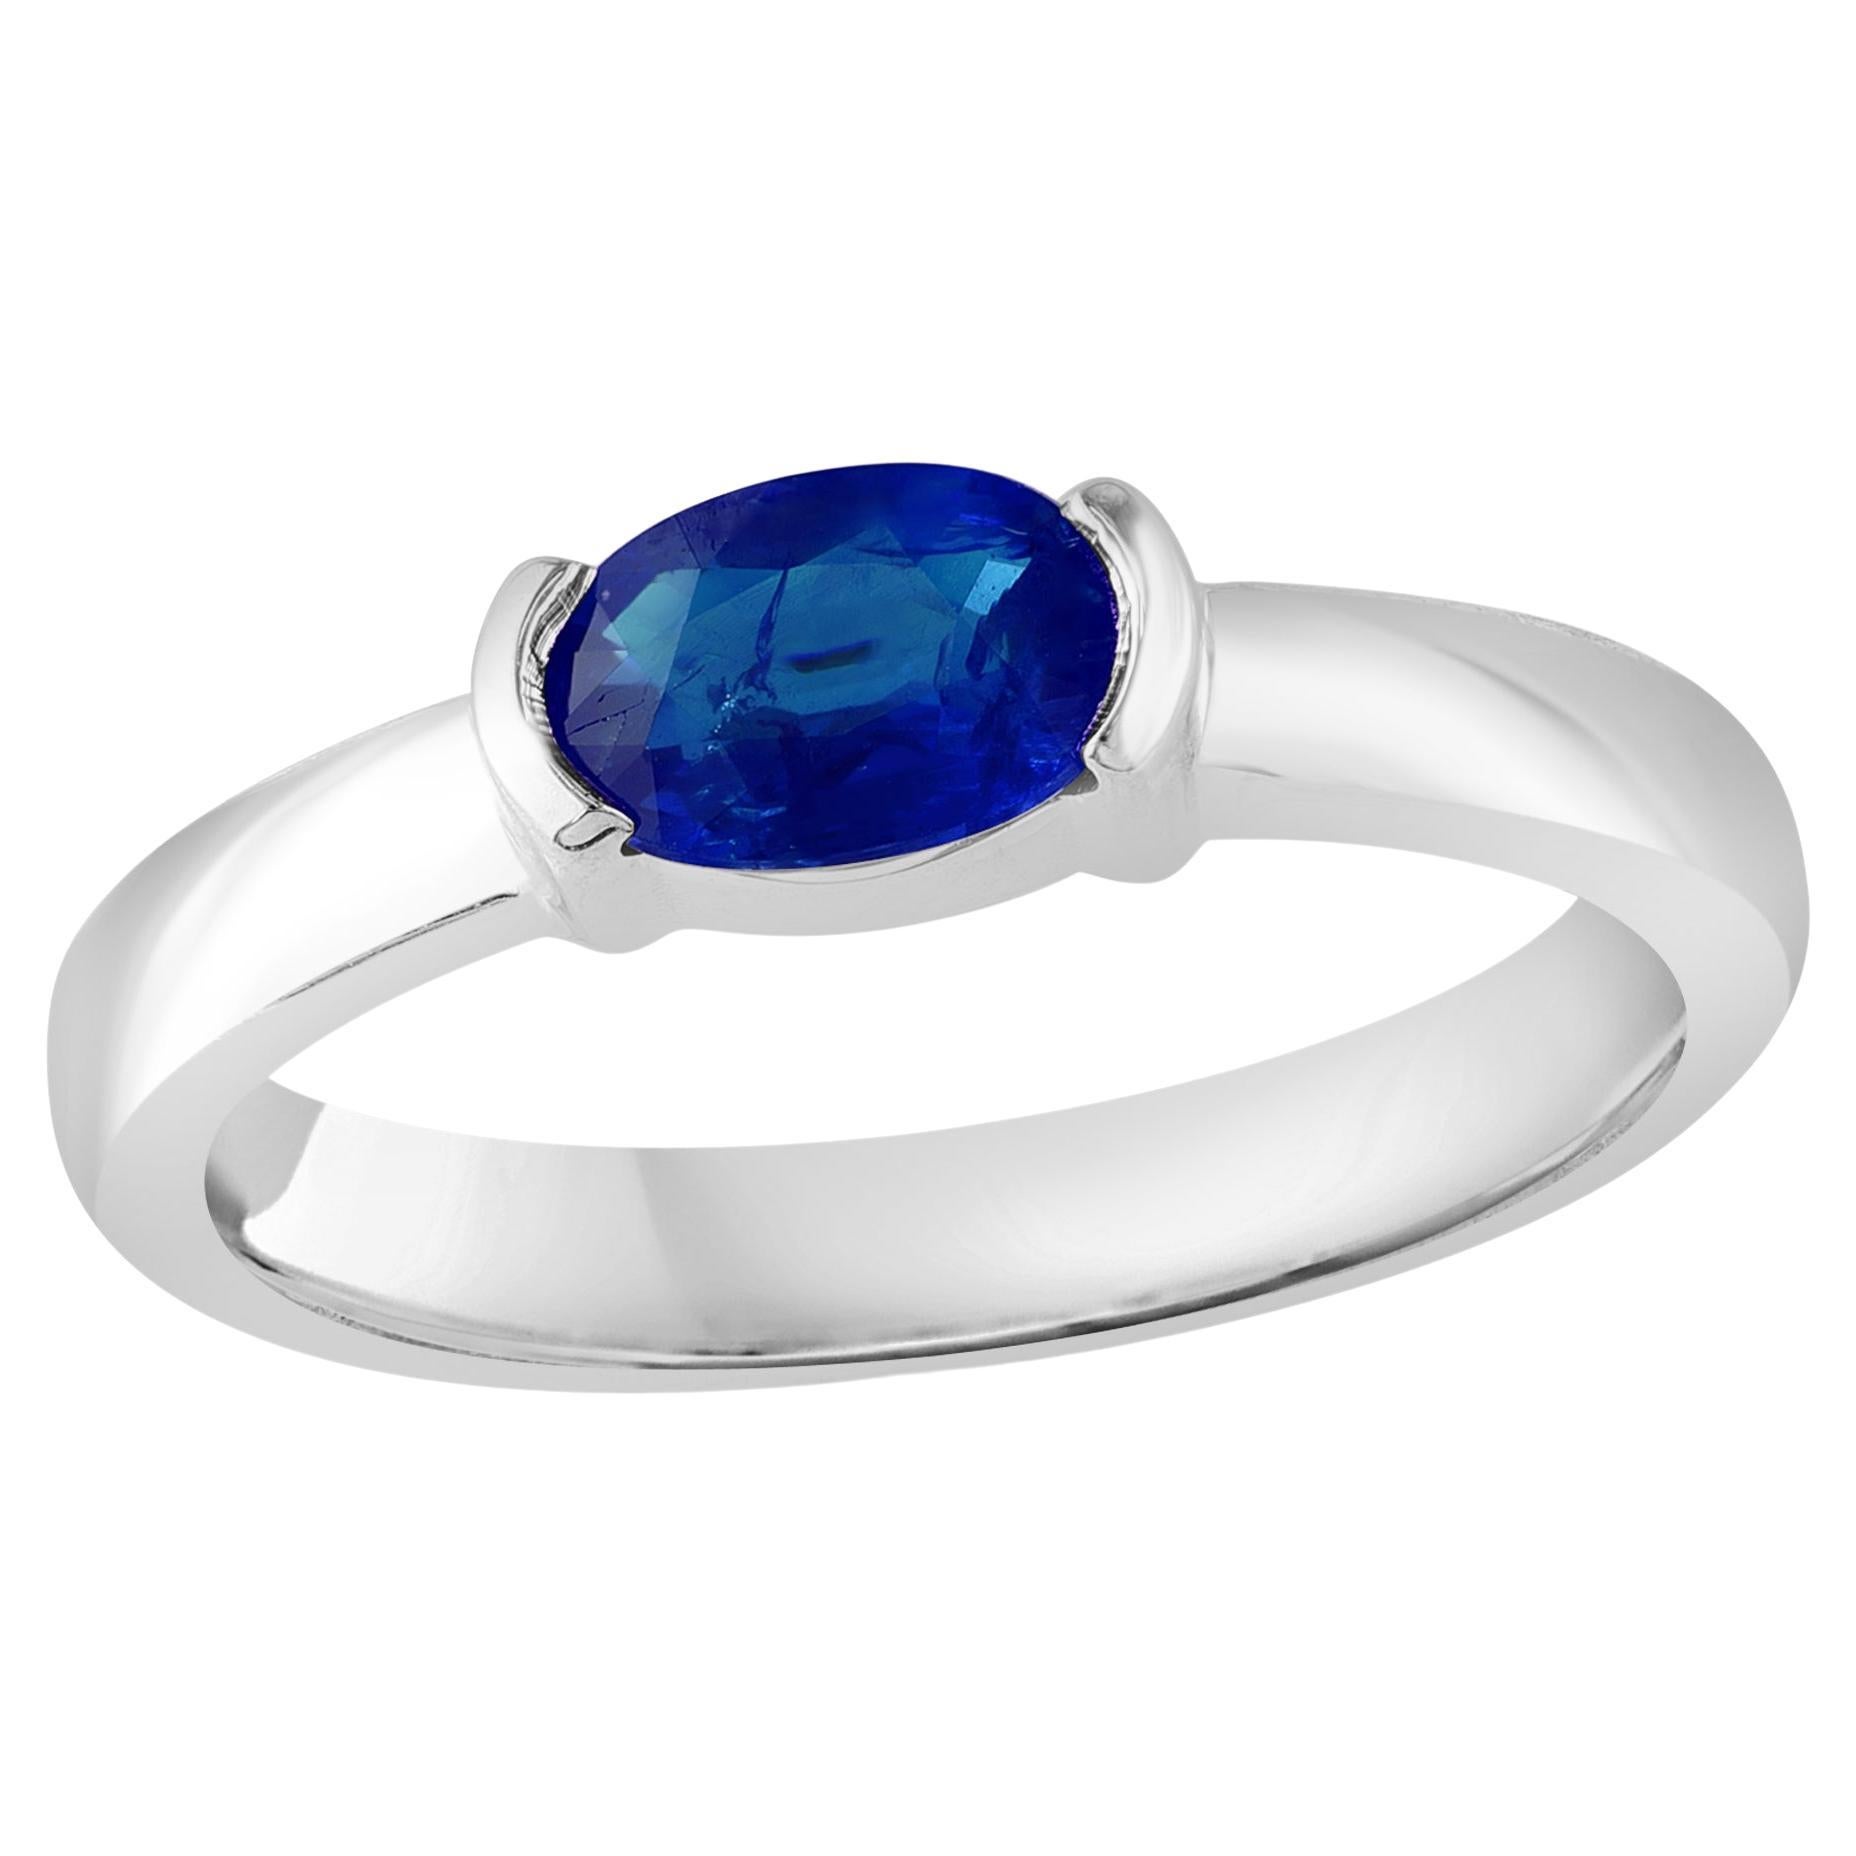 1.00 Carat Oval Cut Blue Sapphire Band Ring in 14K White Gold For Sale